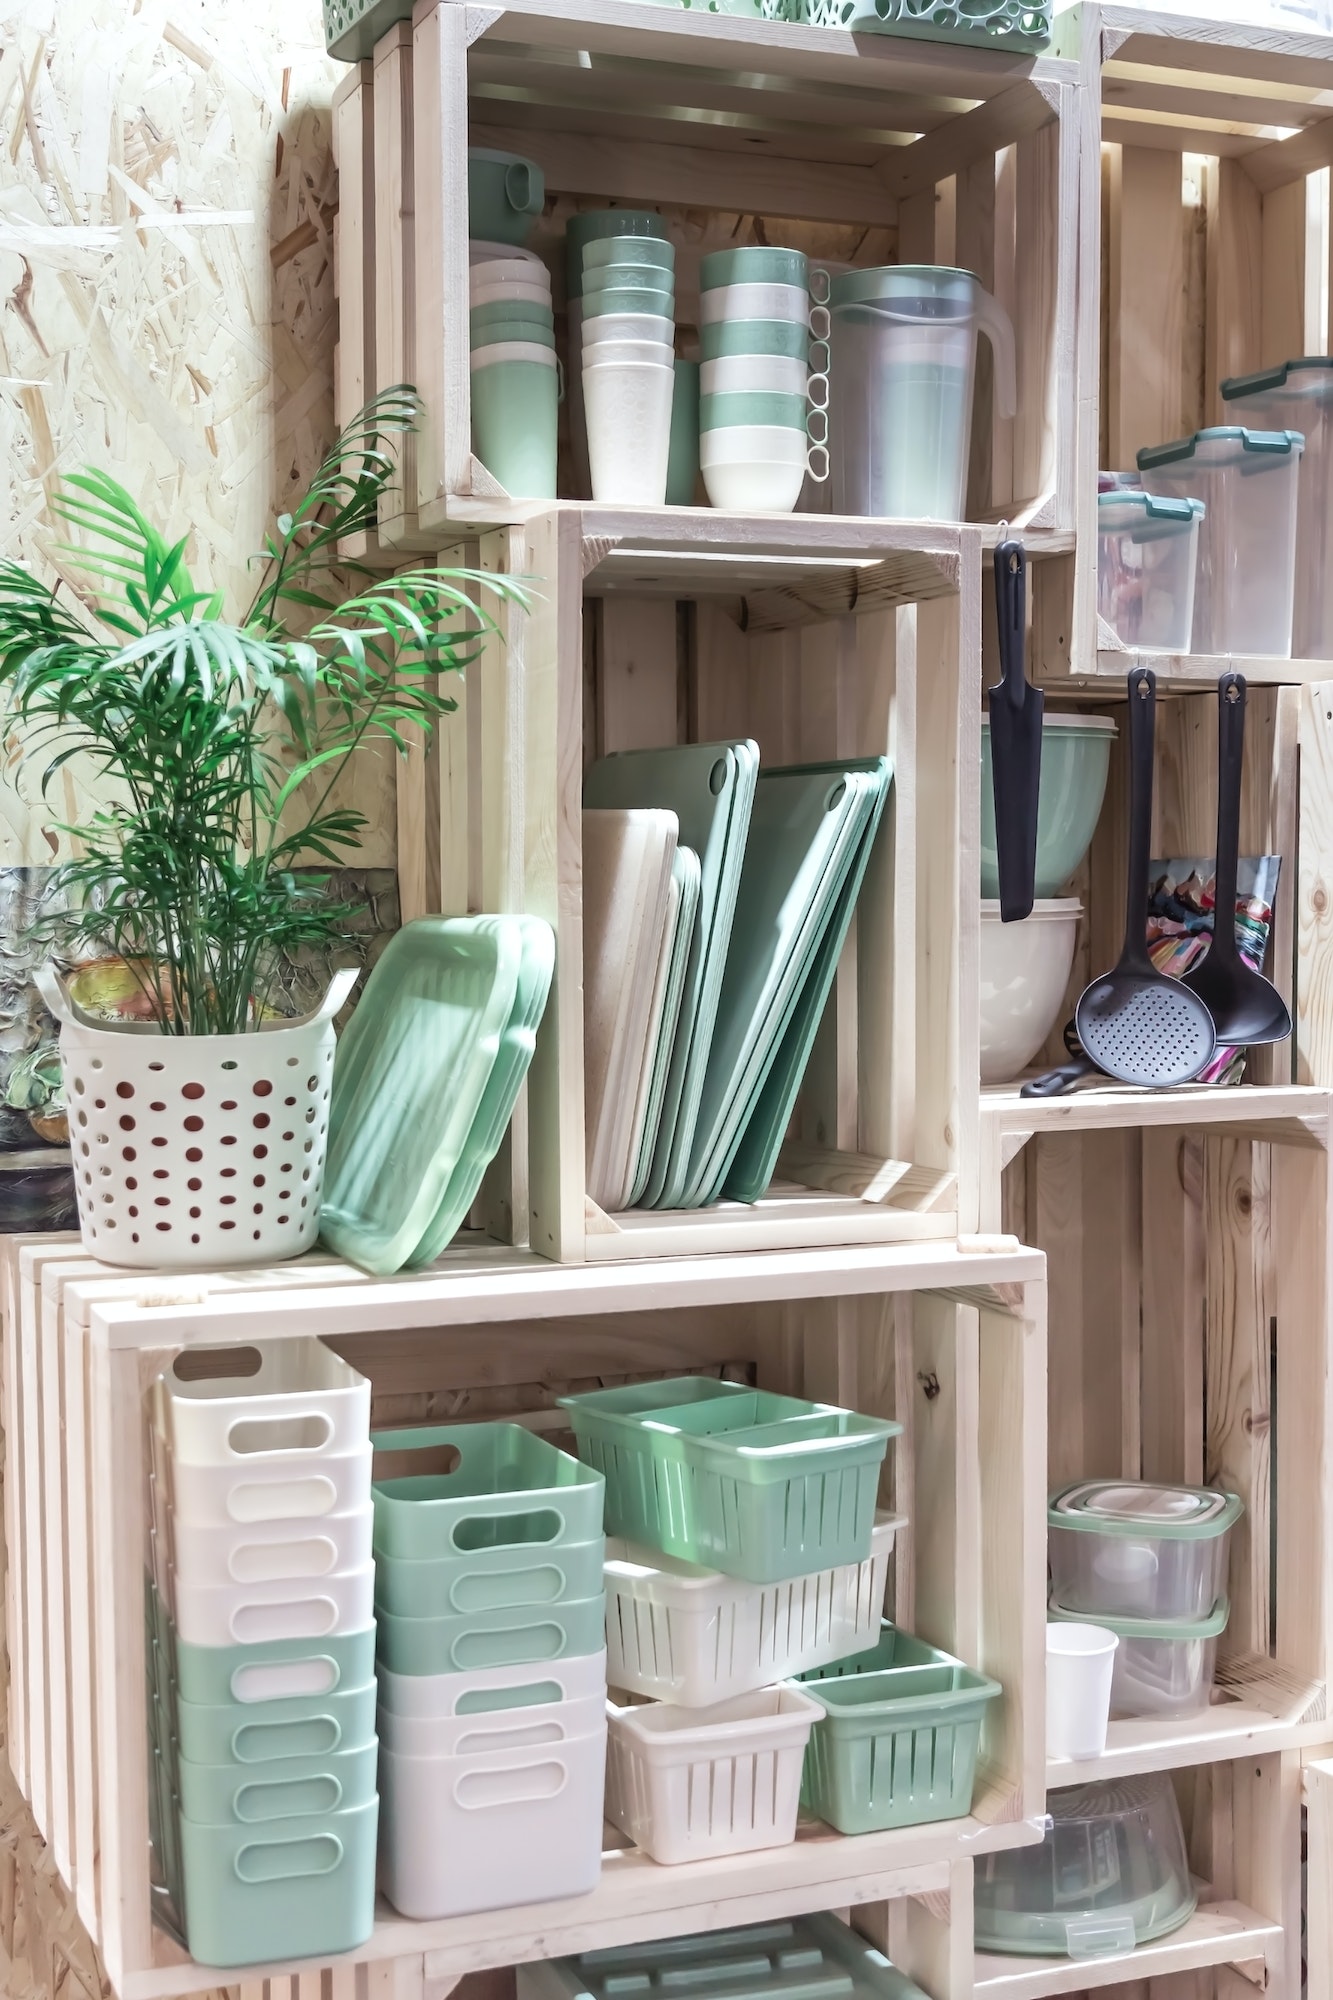 Organization of Storage and Home Space in a Loft Style. Storage Boxes on Shelves